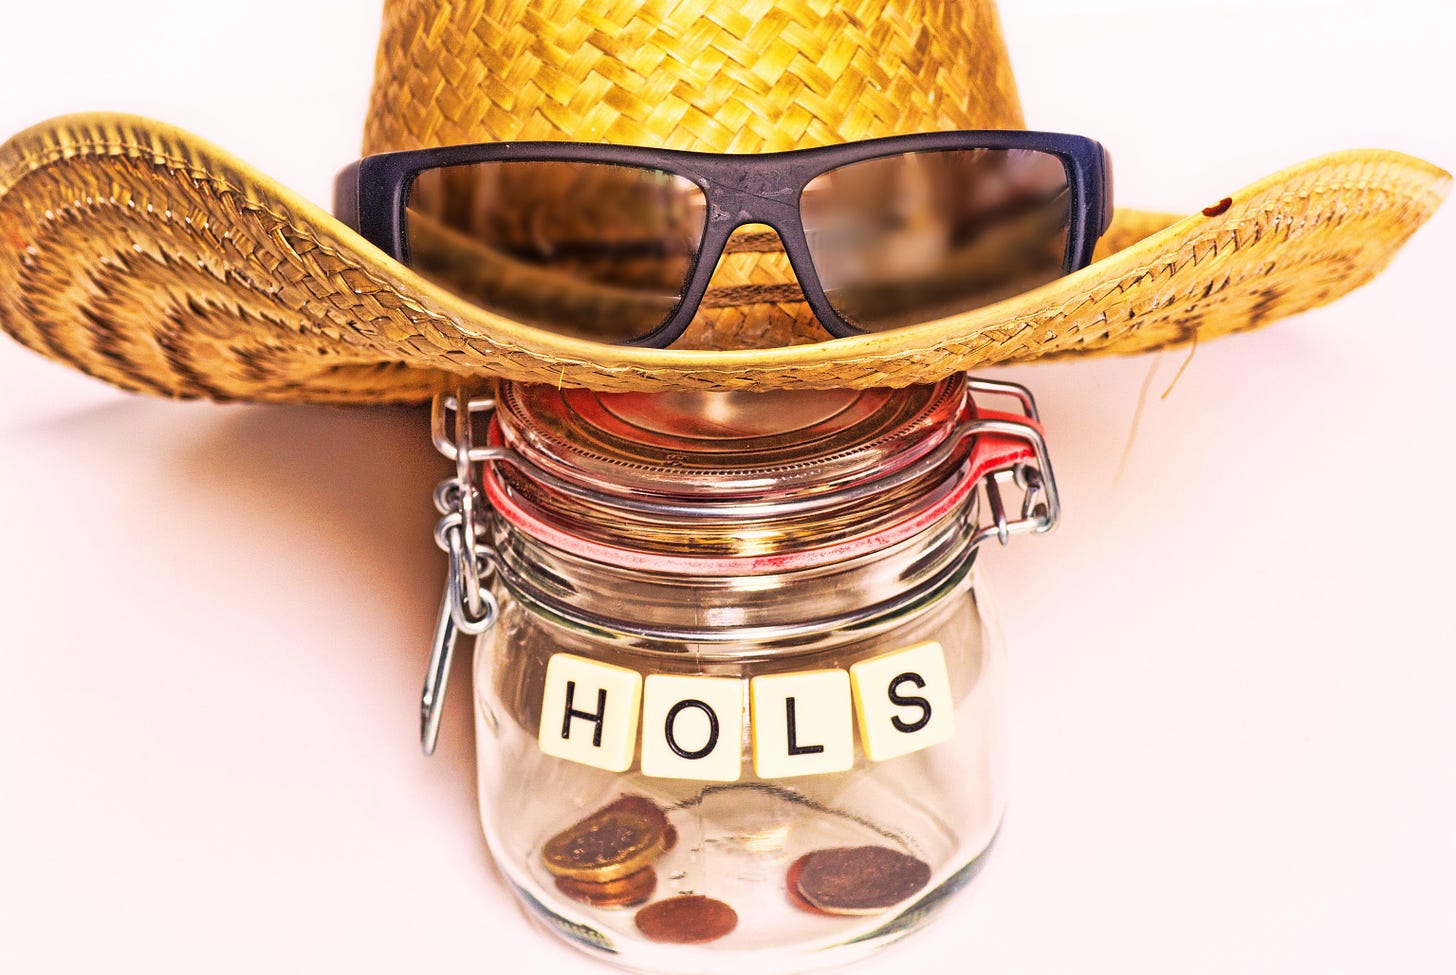 Sun hat with sunglasses and glass jar for holiday savings